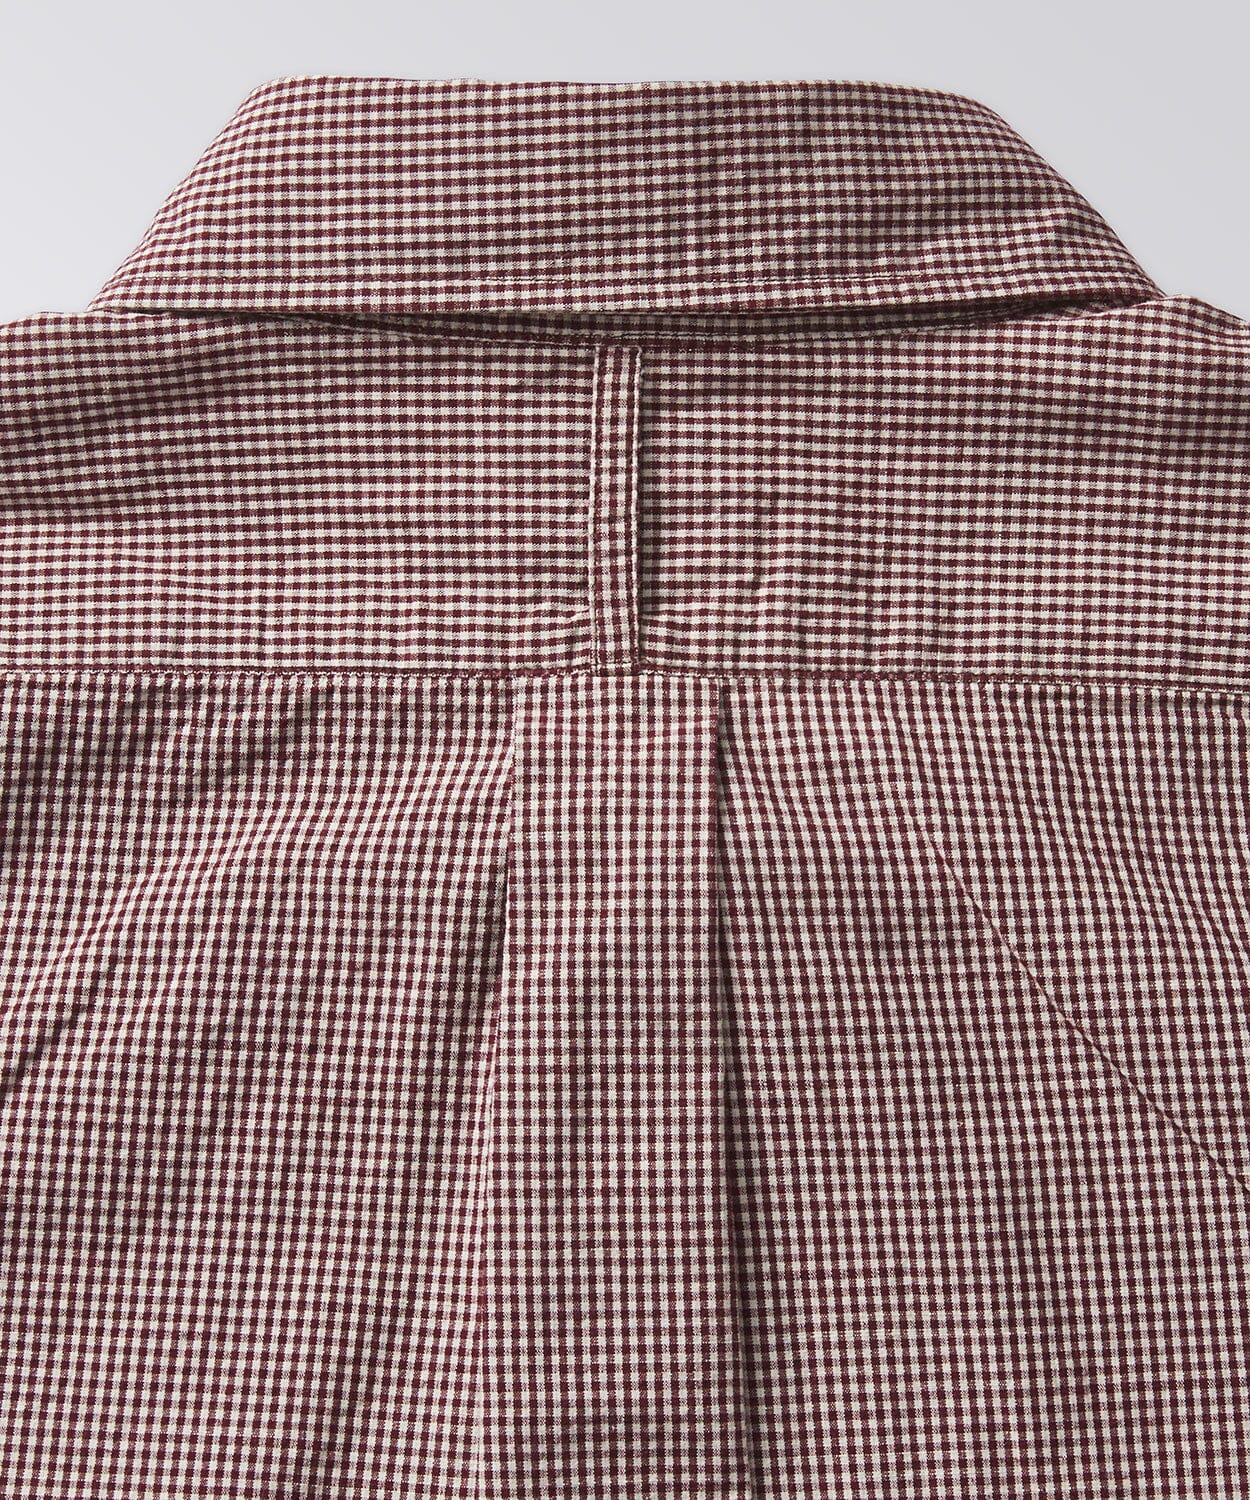 Excella Gingham Shirt Button Downs OOBE BRAND 